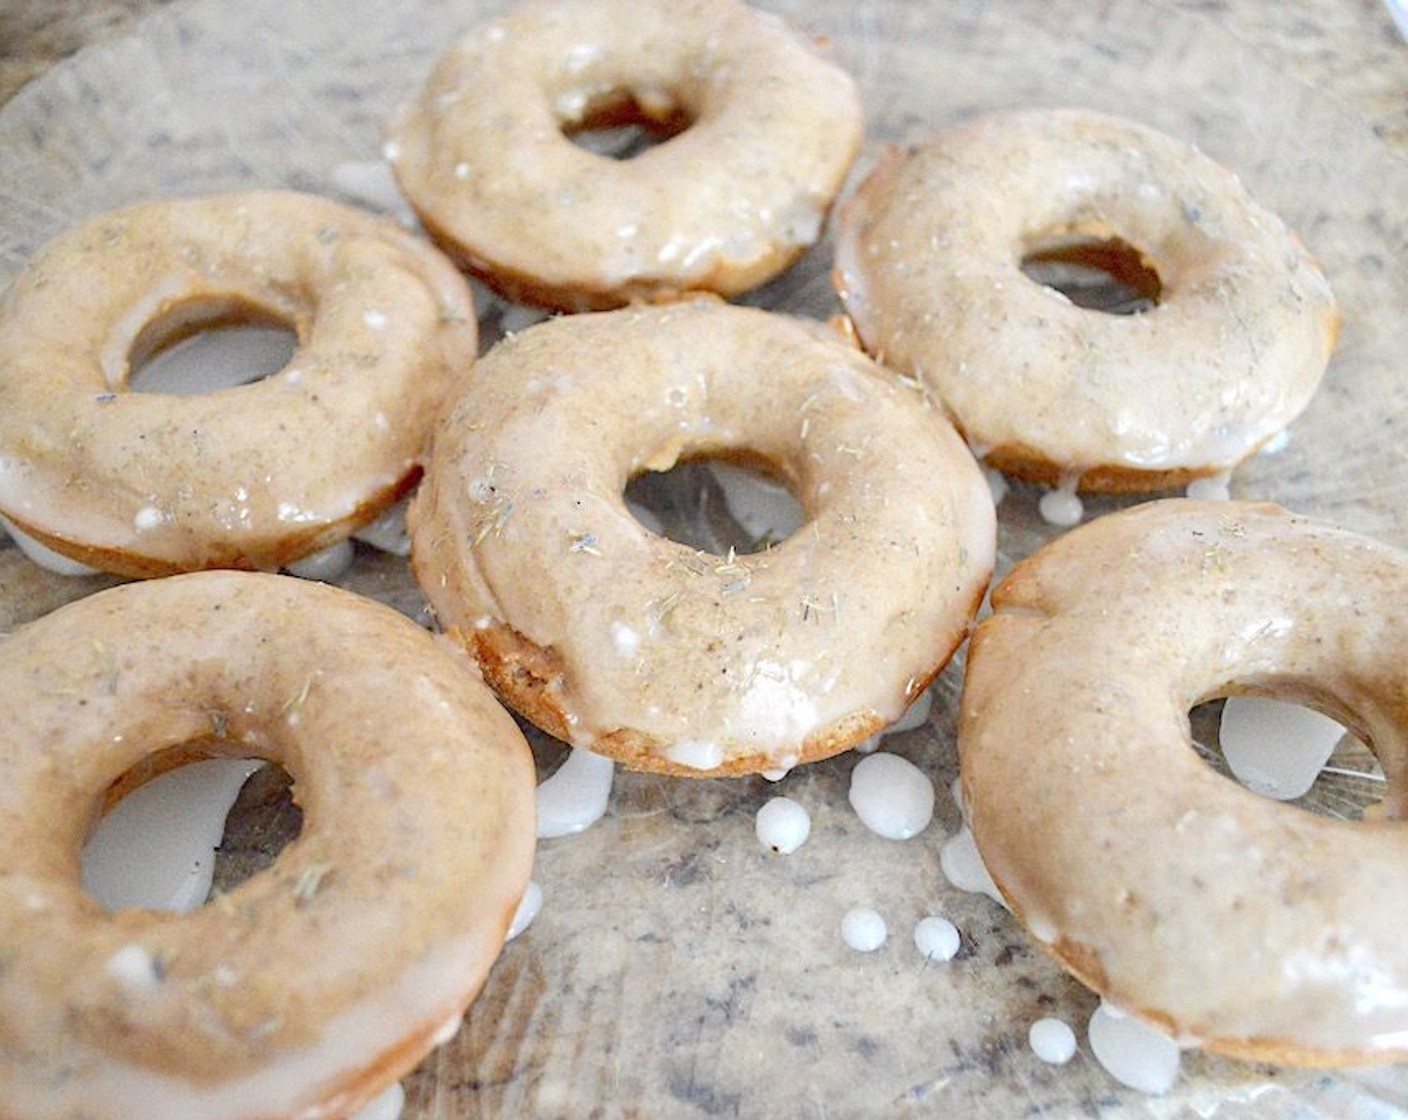 step 8 Dip each donut into the glaze to cover them halfway and place them on a plate. Sprinkle each donut with Ground Lavender (to taste) on top before the glaze dries and serve! They will keep for a couple of days in the refrigerator in an airtight container.